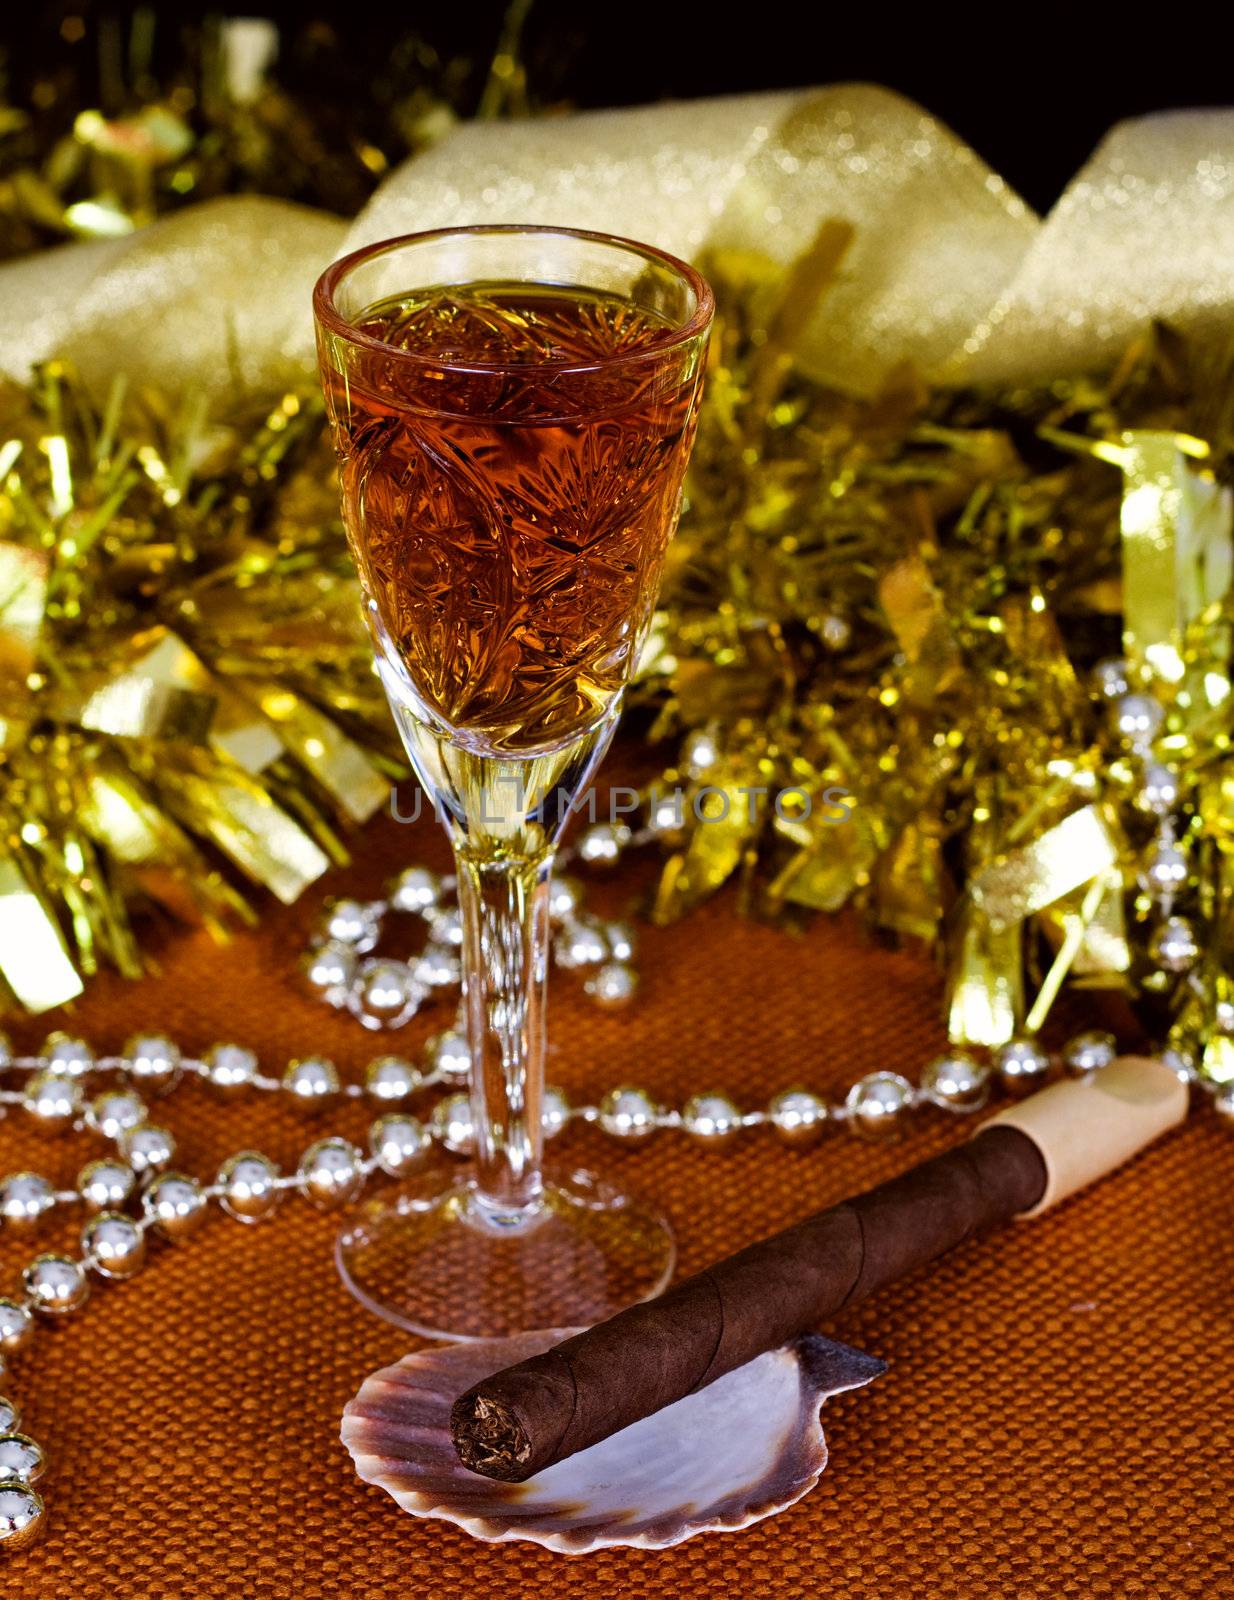 Crystal glass with brandy, cigars and Christmas decorations on a black background
